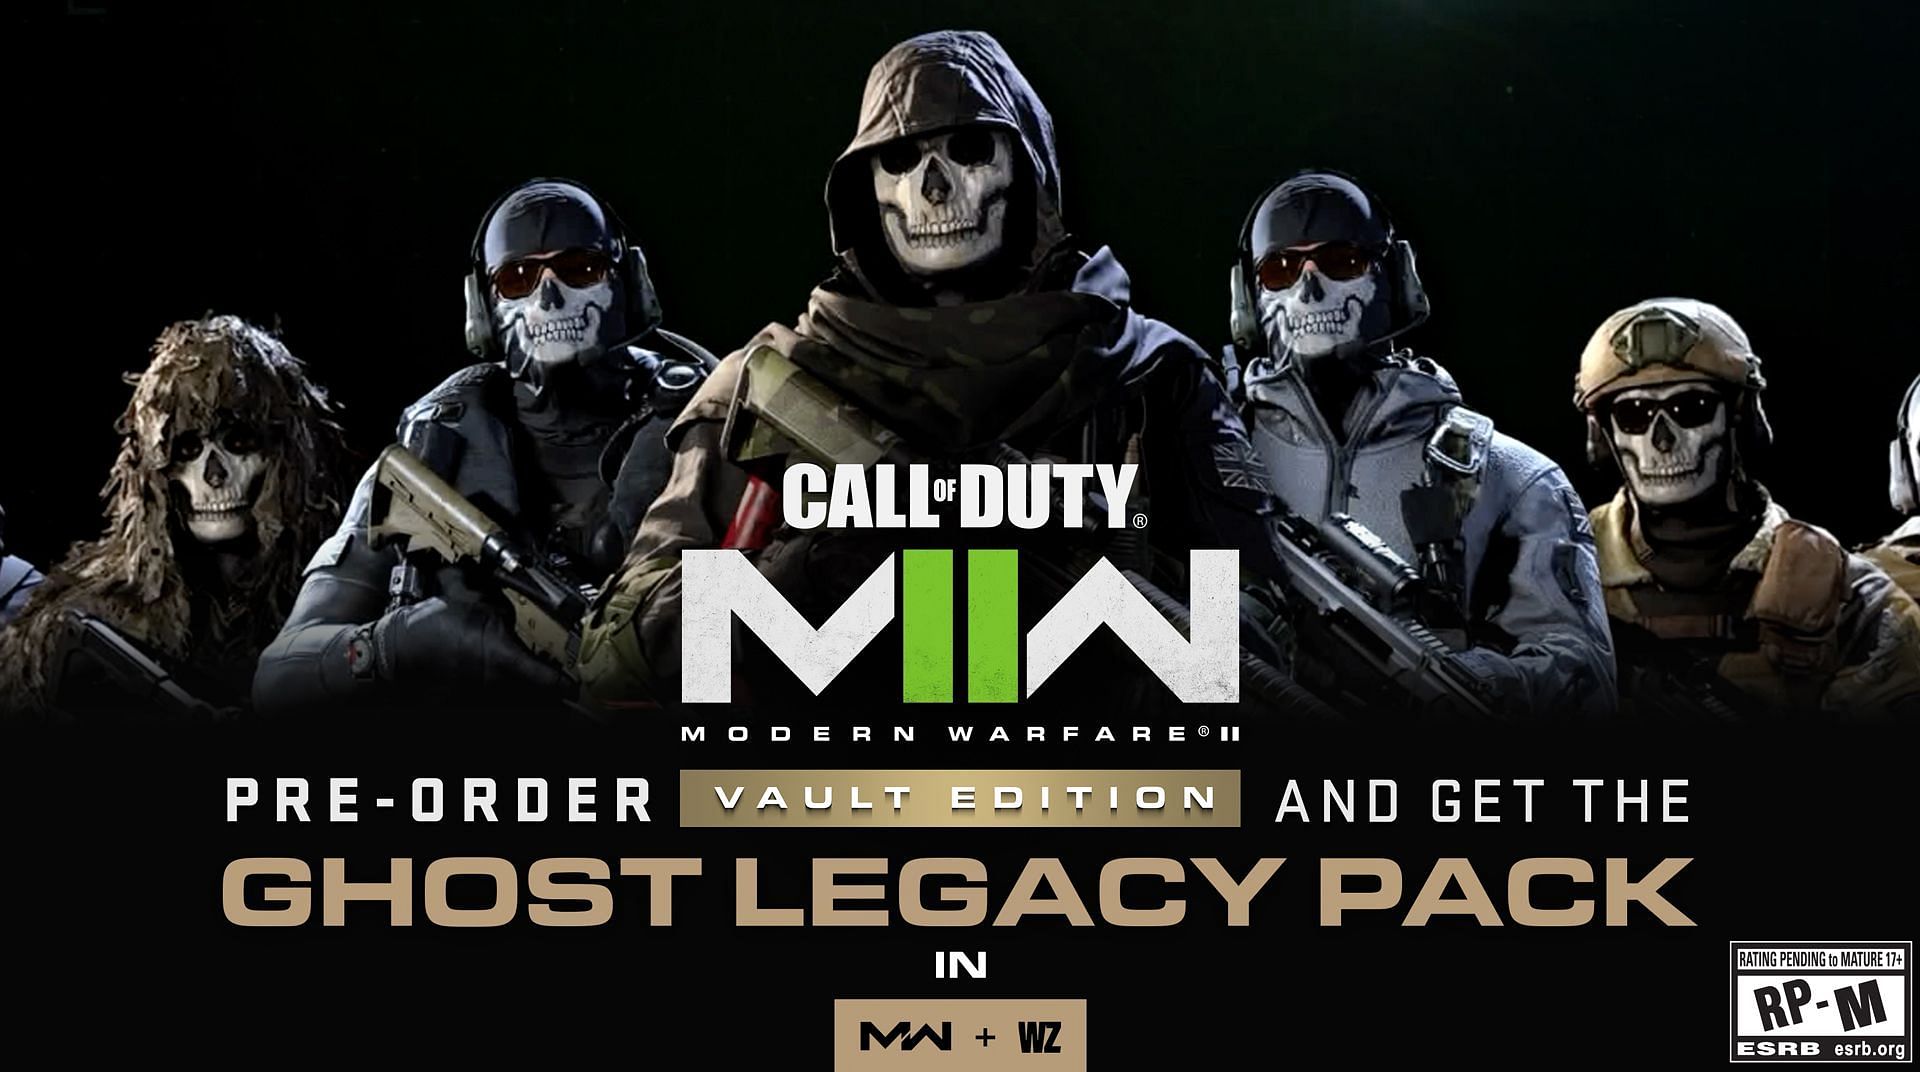 Ghost Legacy Pack (Image via Activision)